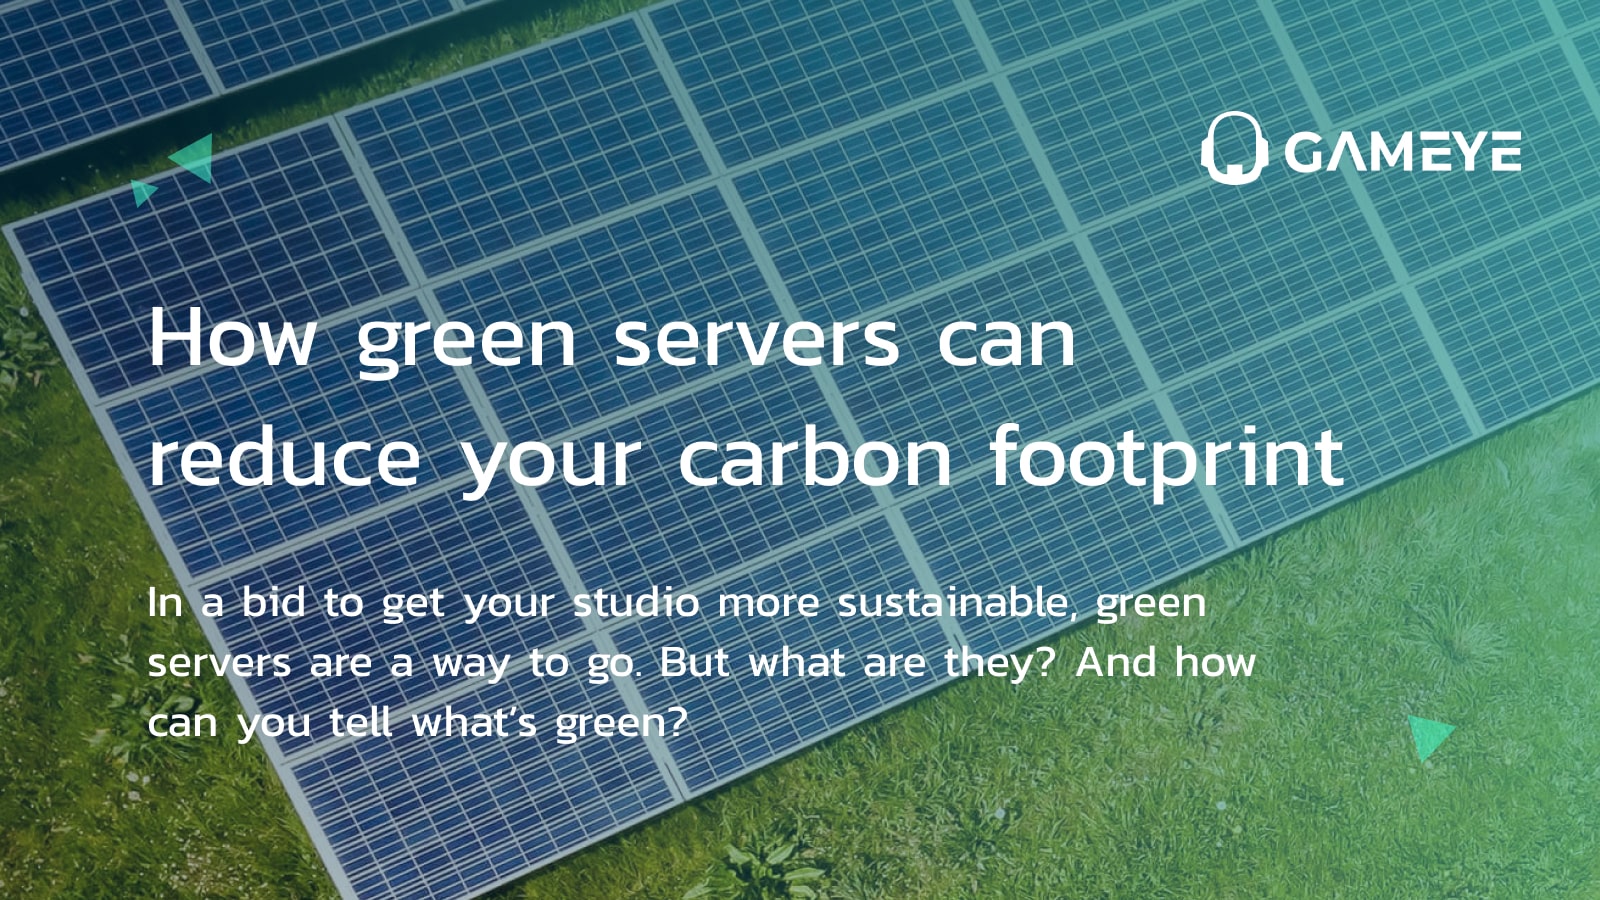 Gaming Responsibly: How green servers can reduce your carbon footprint